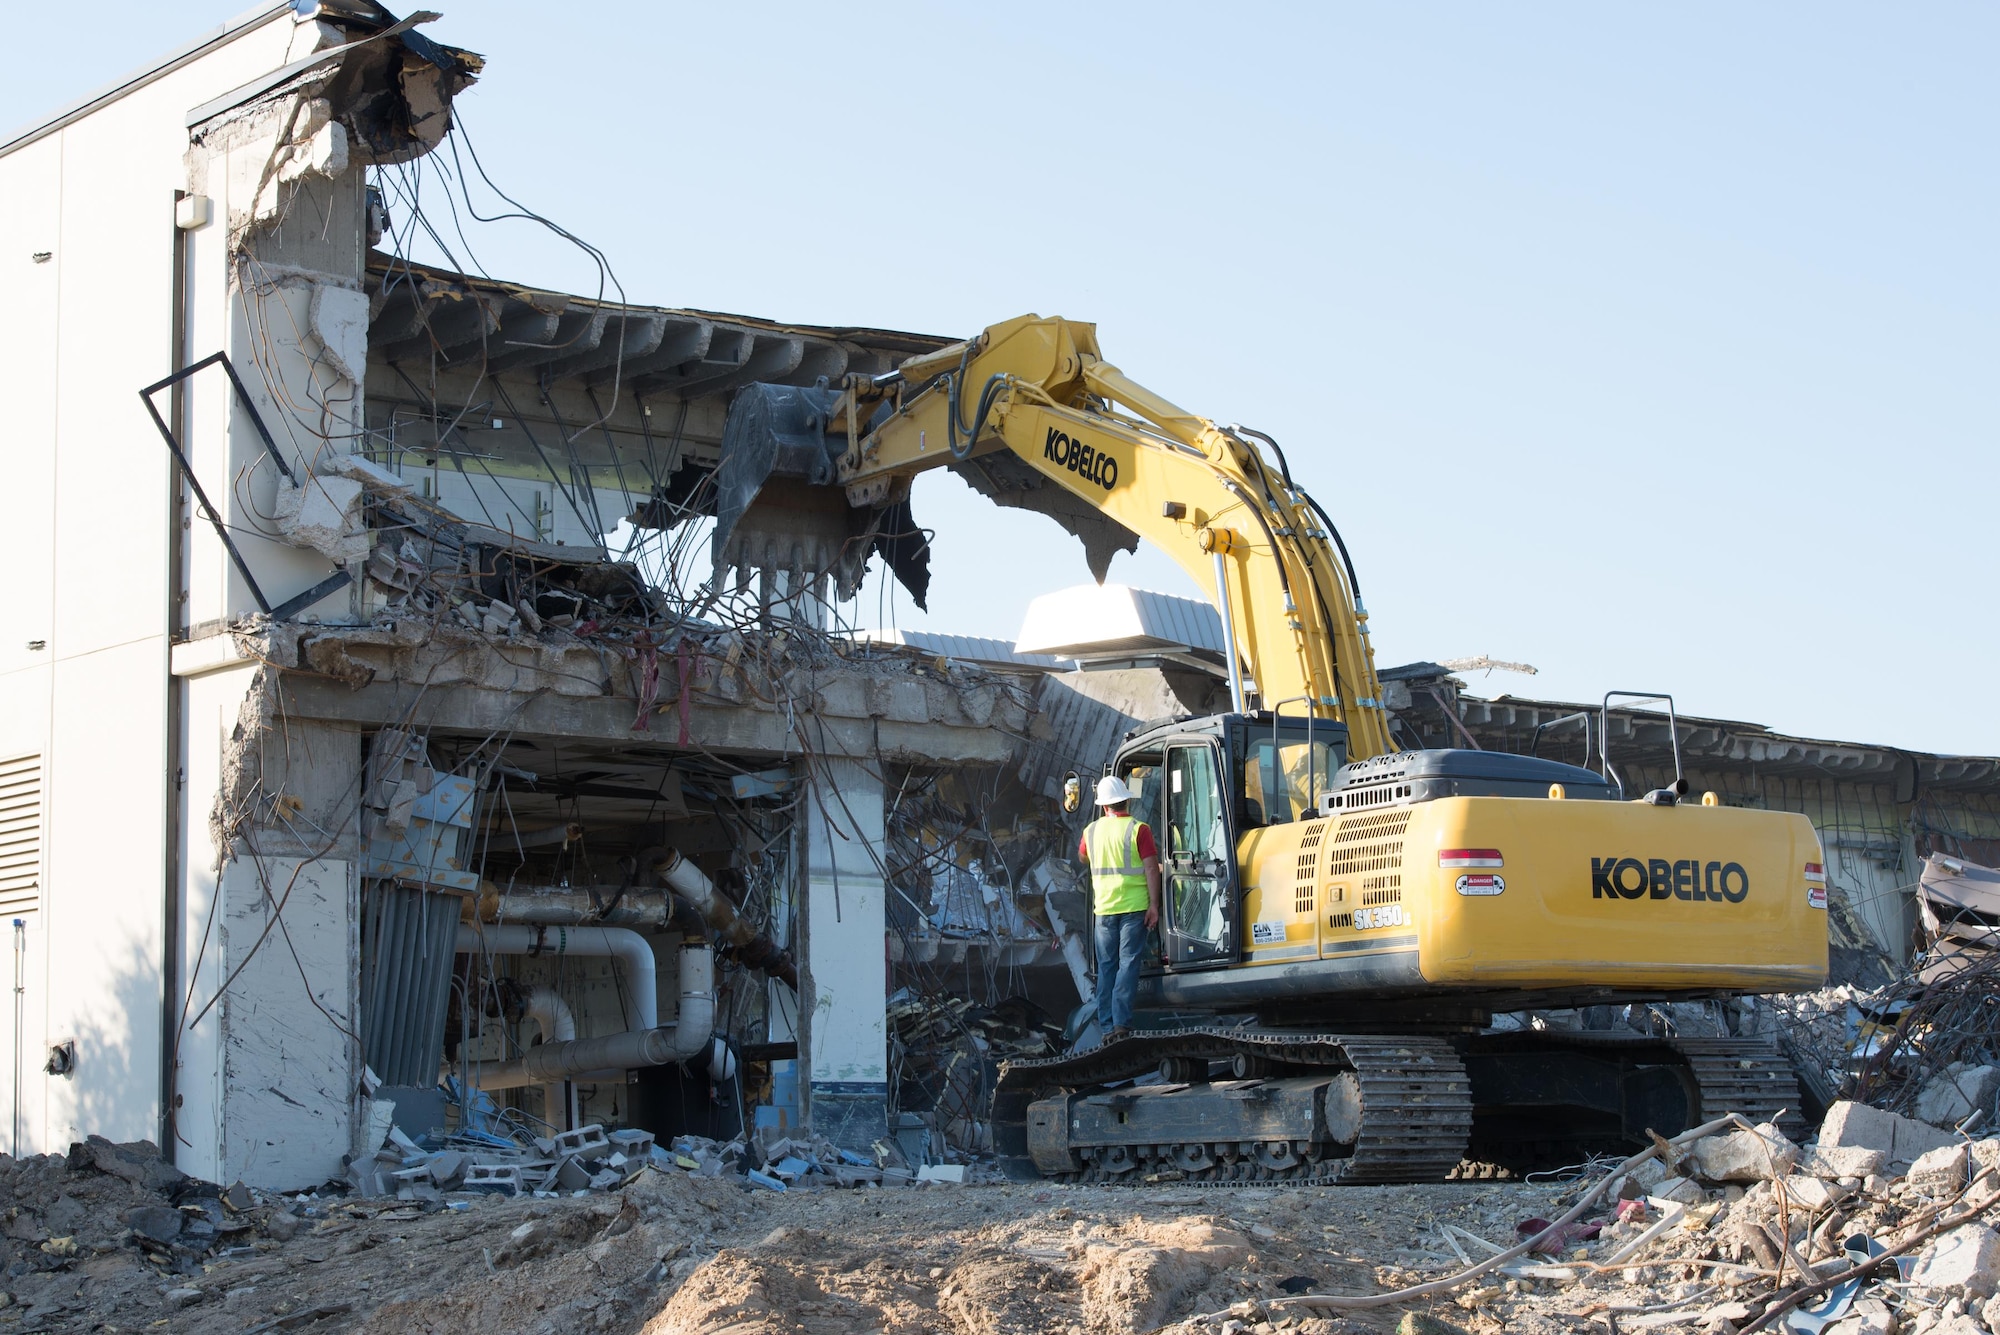 Col. Michele Edmondson, 81st Training Wing commander, receives instructions from Jamie Bean, base operations support contractor, as she operates an excavator to continue the demolition of Hewes Hall, August 28, 2015, at Keesler Air Force Base, Miss. In addition to helping the Air Force plan to reduce its footprint by 20% before 2020, the building was also demolished because it was within the clear zone of the air field. (U.S. Air Force photo by Marie Floyd)